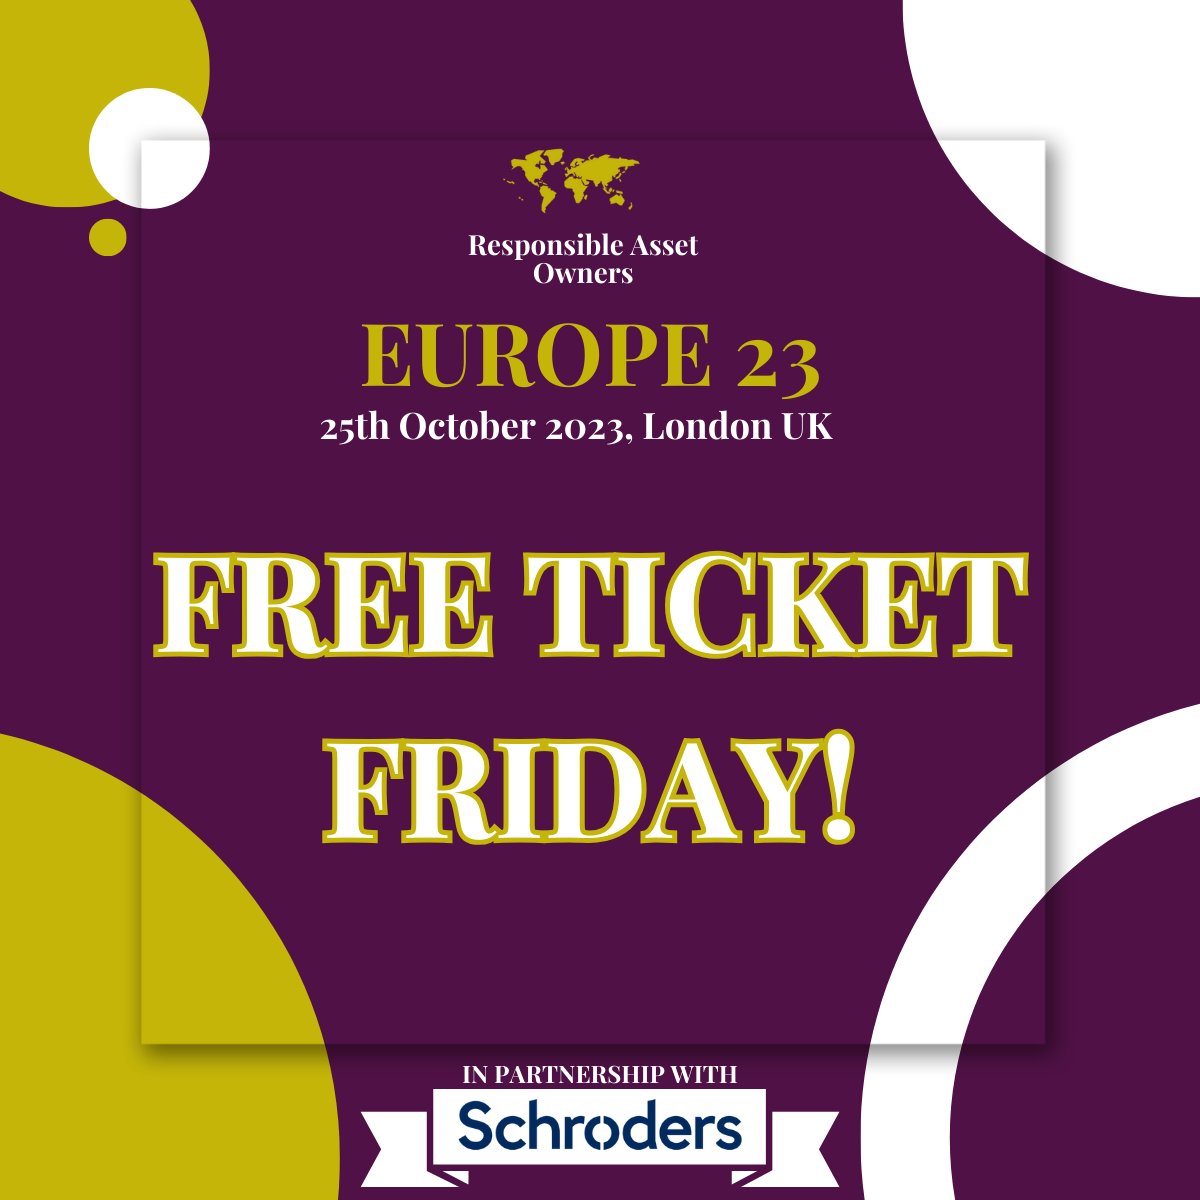 🎉 It's Free Ticket Friday!  We're giving away 1x pair of FREE tickets to RAO Global Europe 2023! Don't miss this chance. Comment with #RAOGlobalEurope below for your chance to win #FreeTicketFriday #RAOGlobalEurope